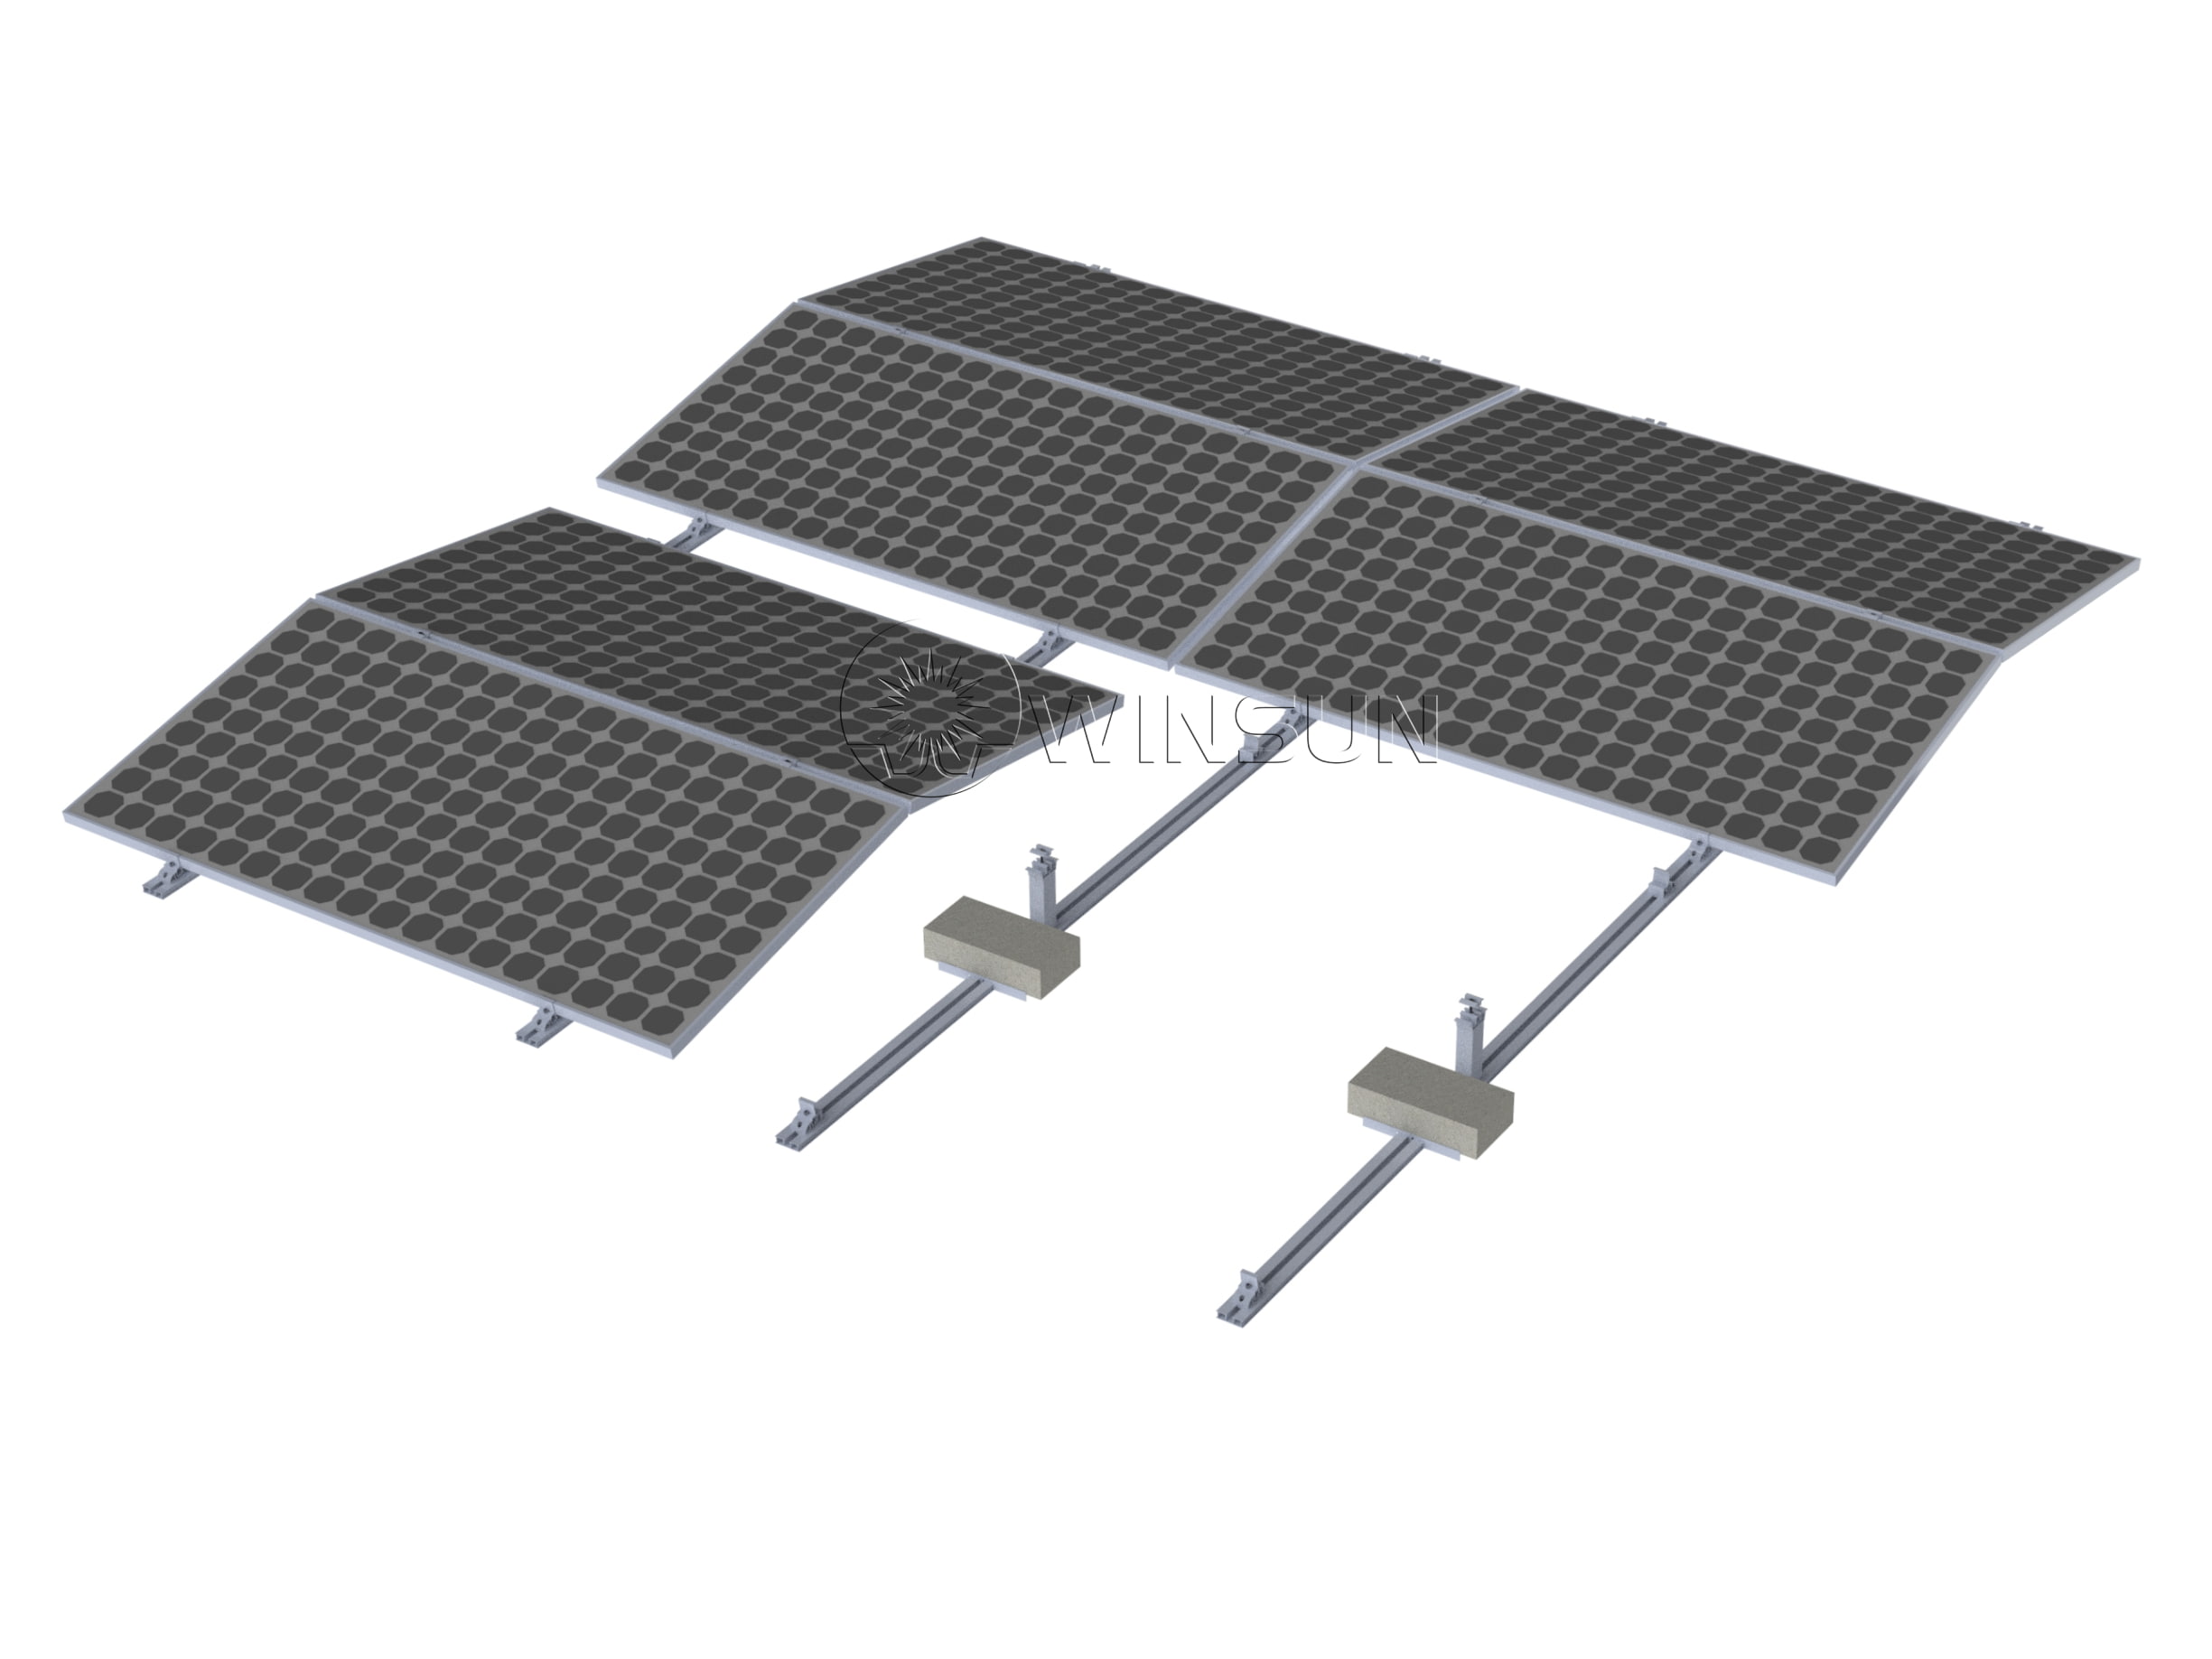 winsun new ballasted solar mounting system for flat roof solar panel mounting